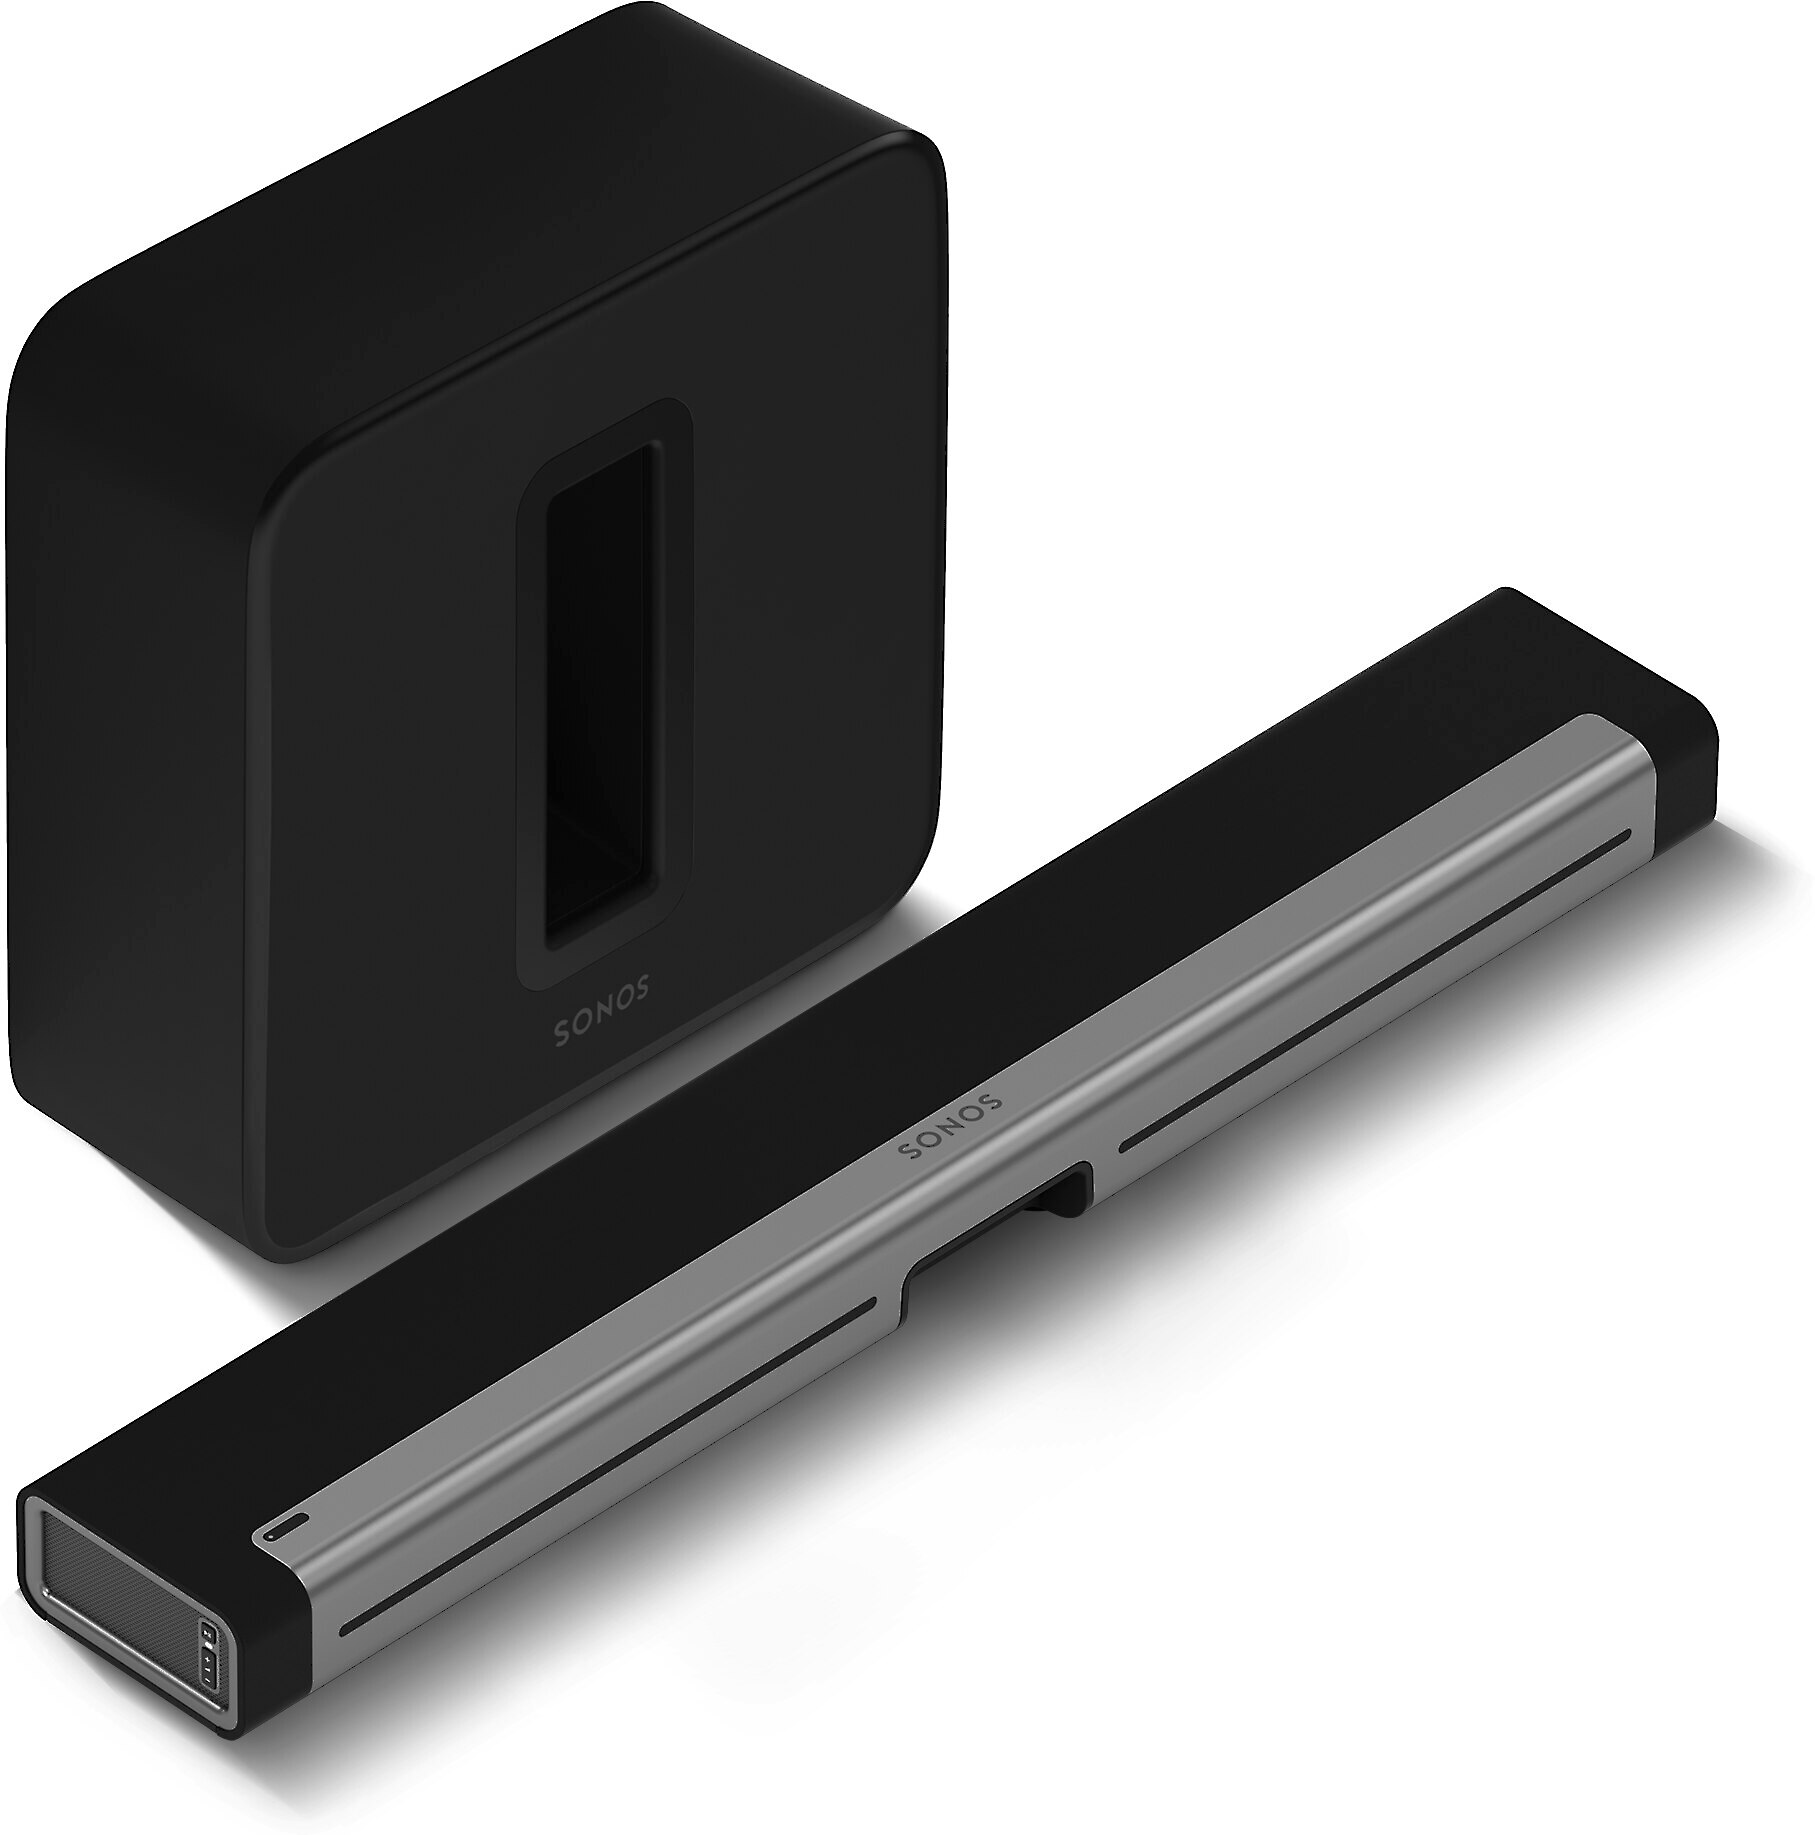 Sonos Playbar 3.1 Home Theater System 